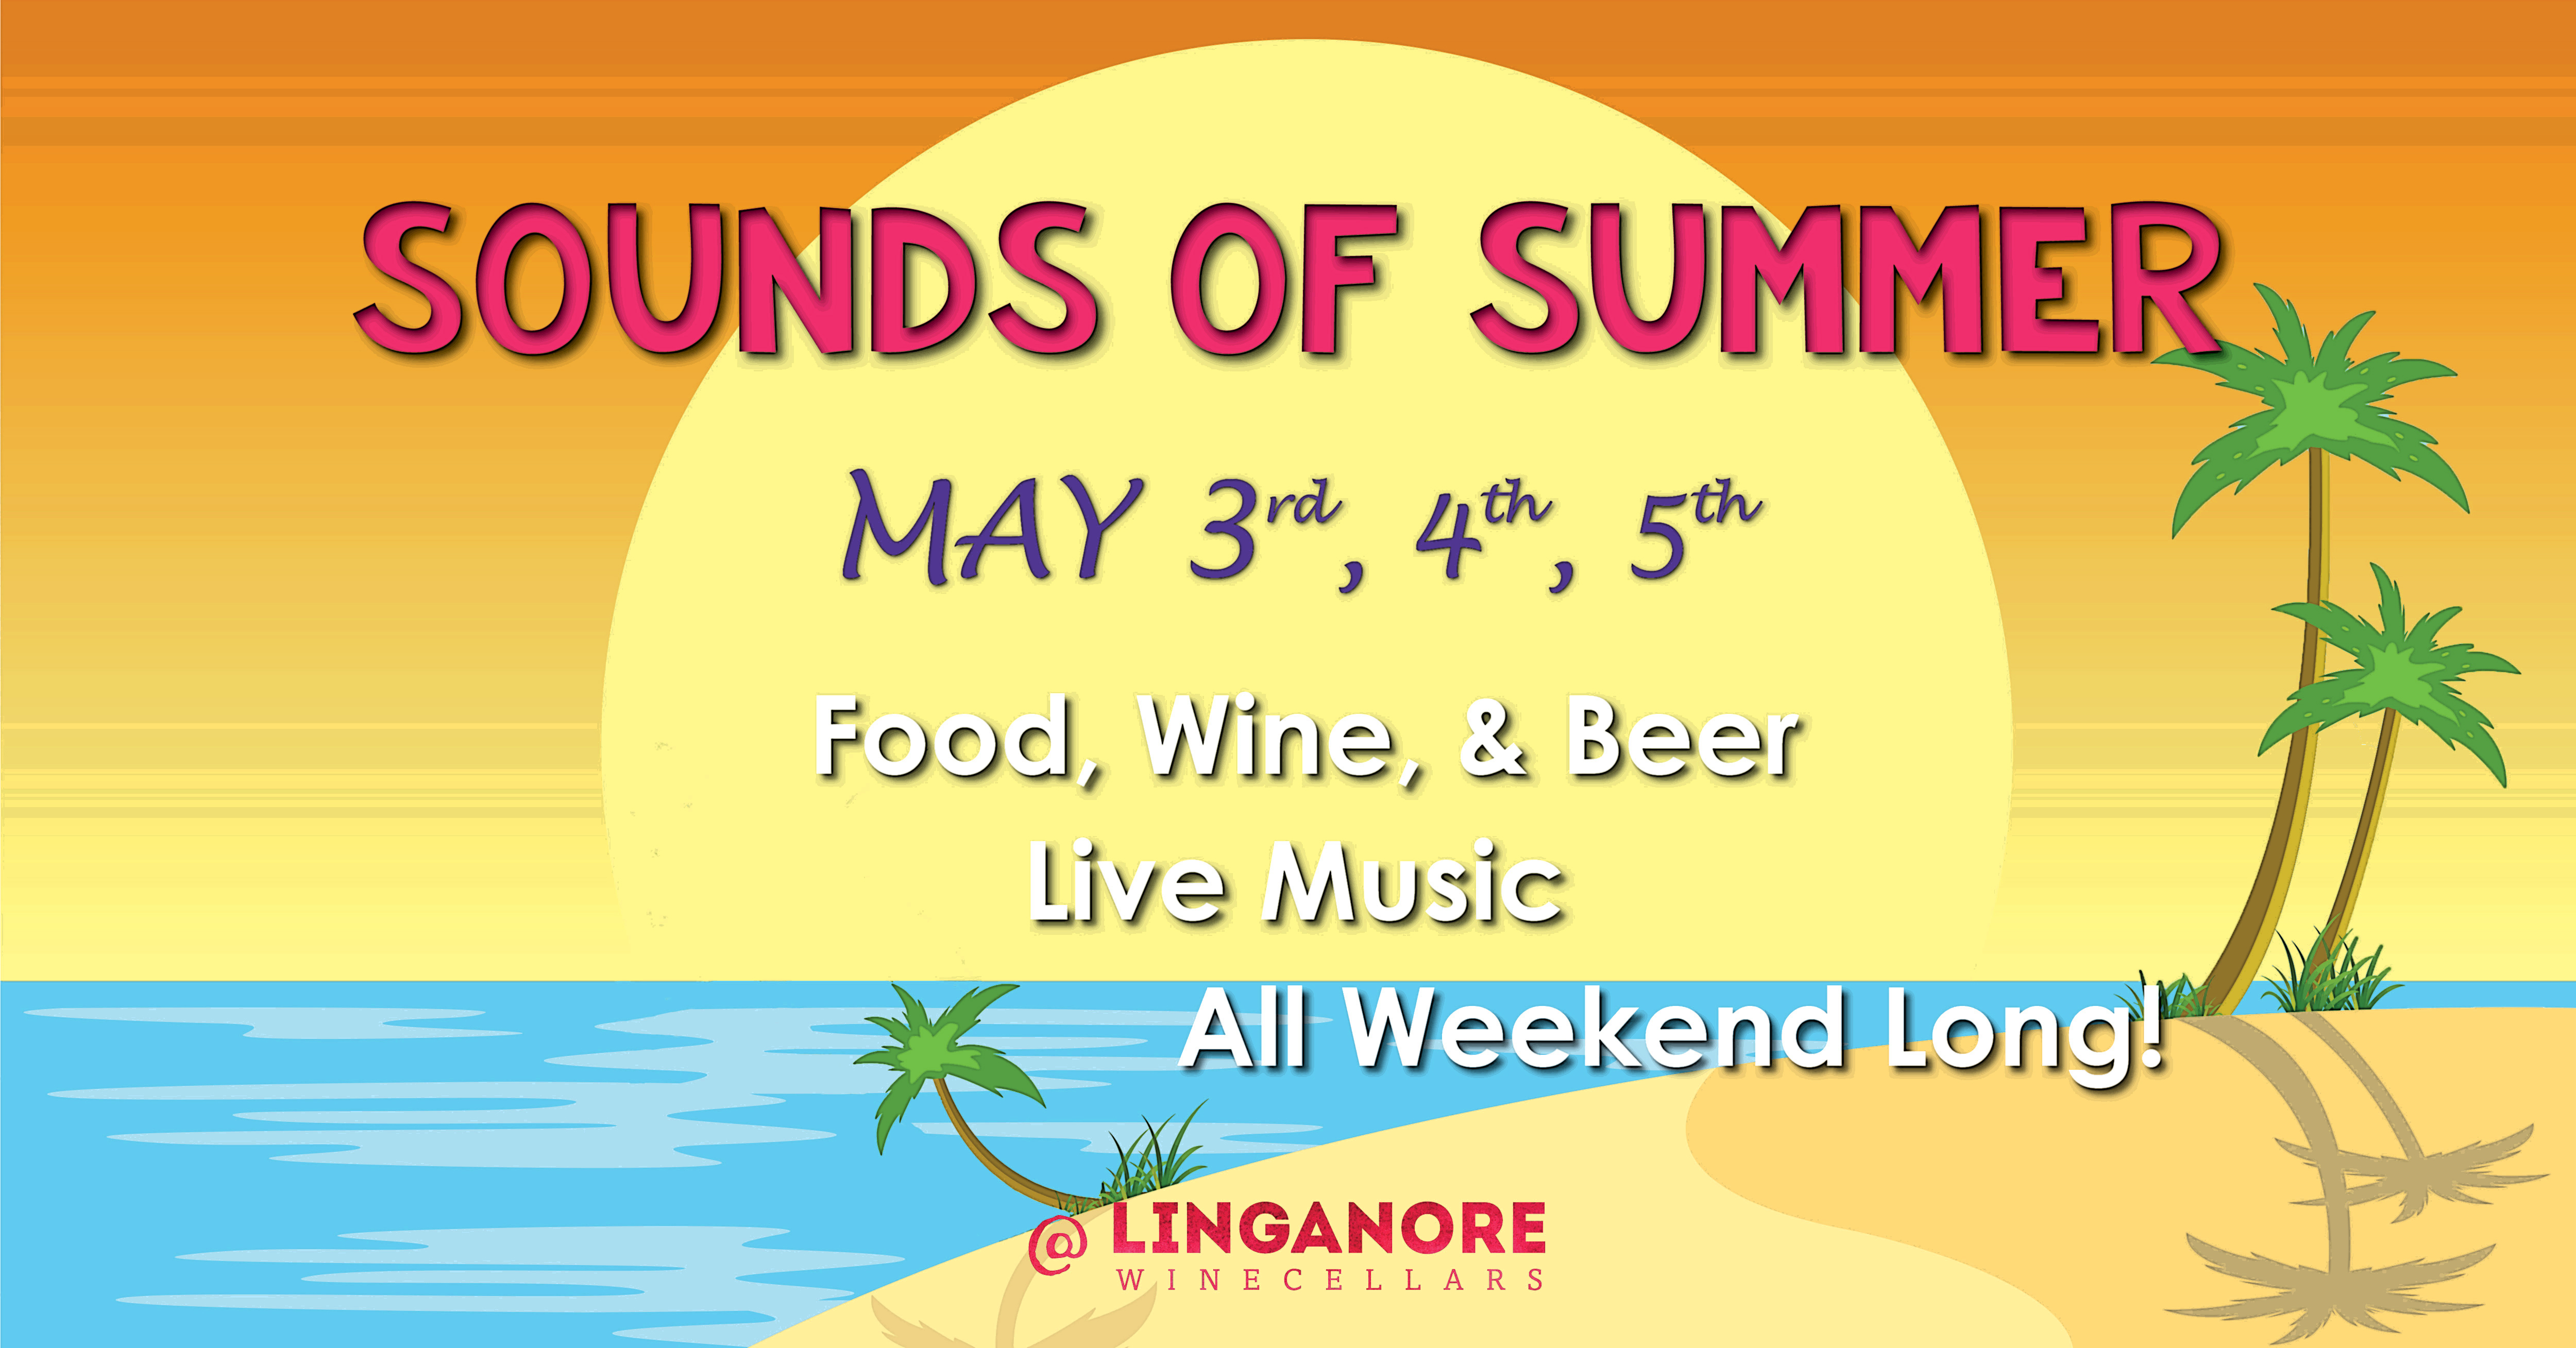 Sounds of Summer is May 3rd 5th and 5th